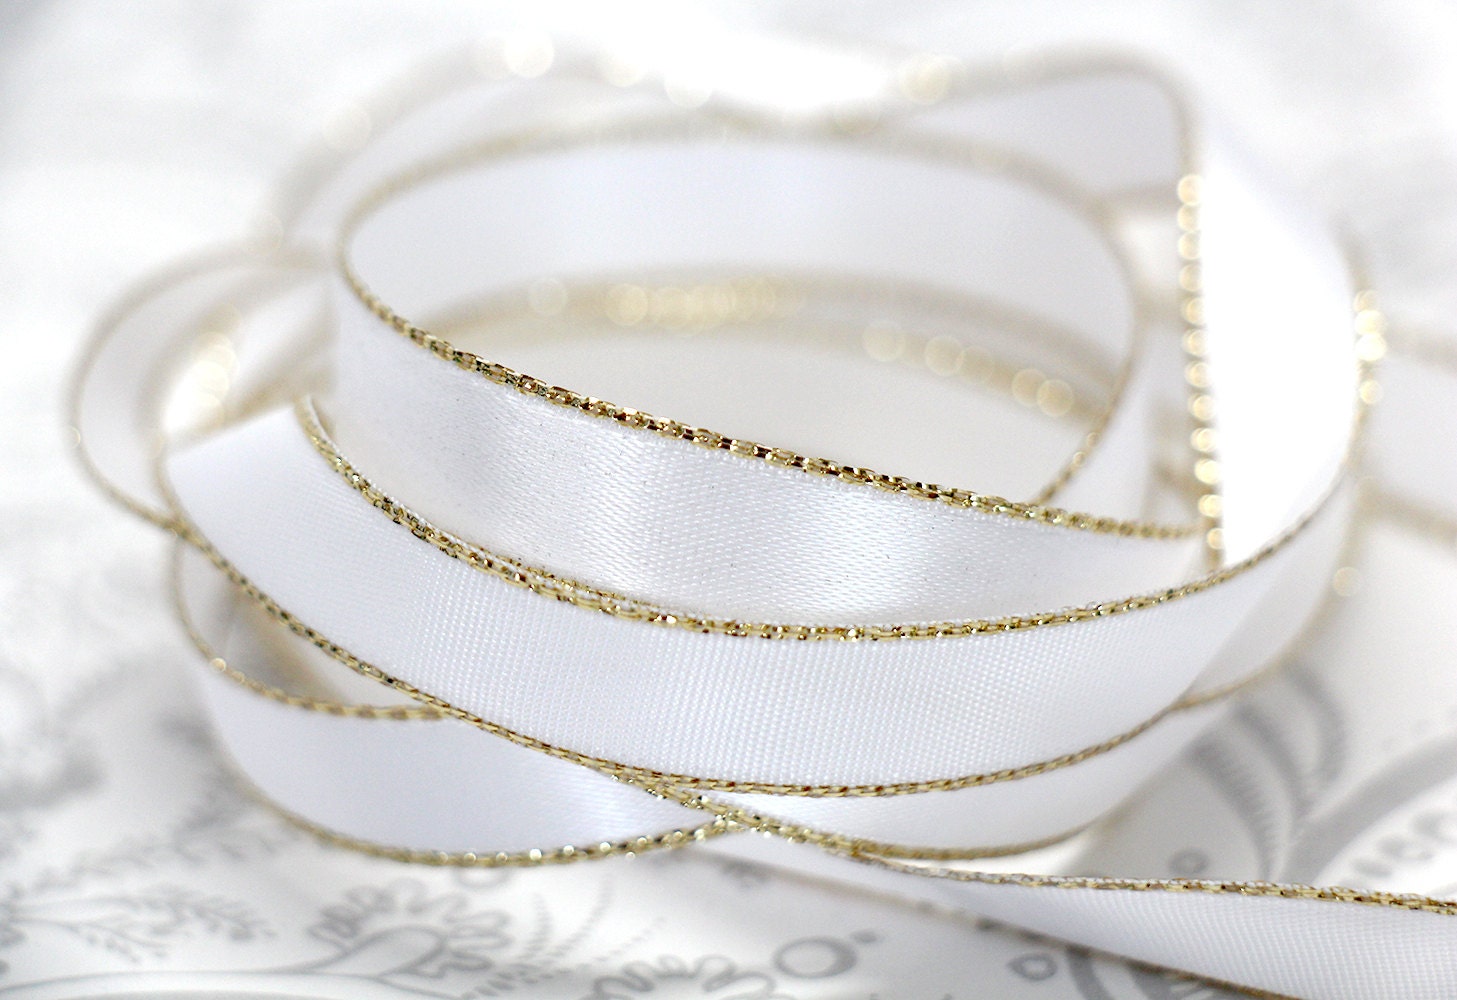 Gold Edged White Satin Ribbon Inch Yards Mm From Thebluesewingmachine On Etsy Studio